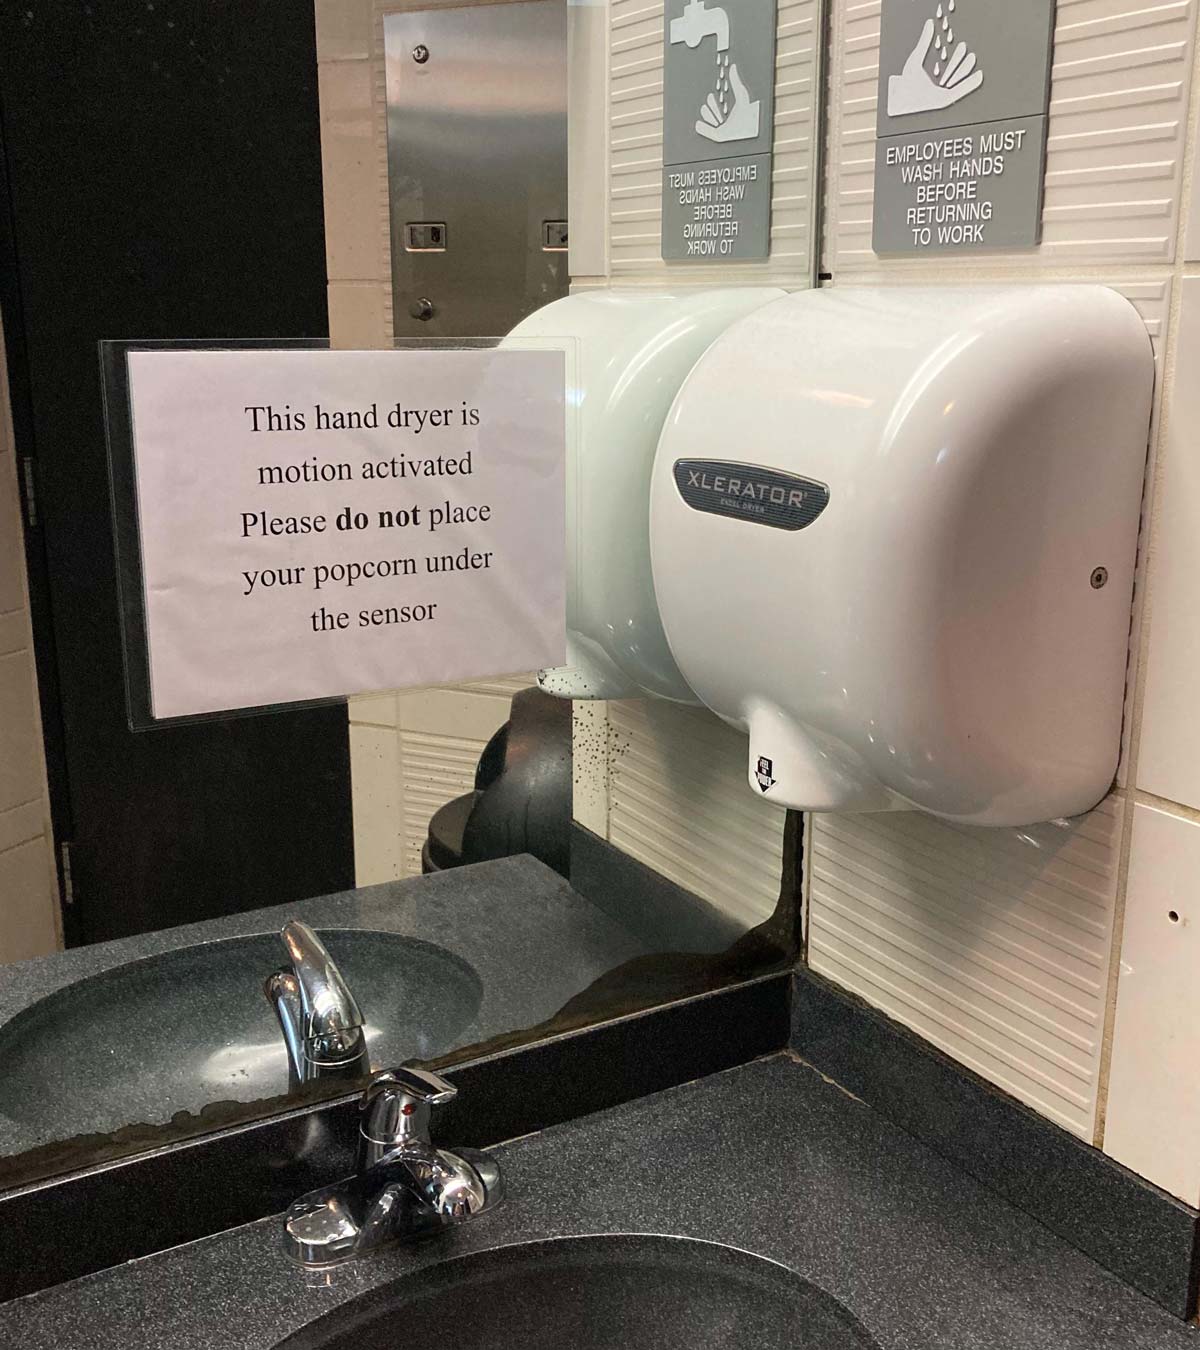 Saw this sign in a movie theatre restroom